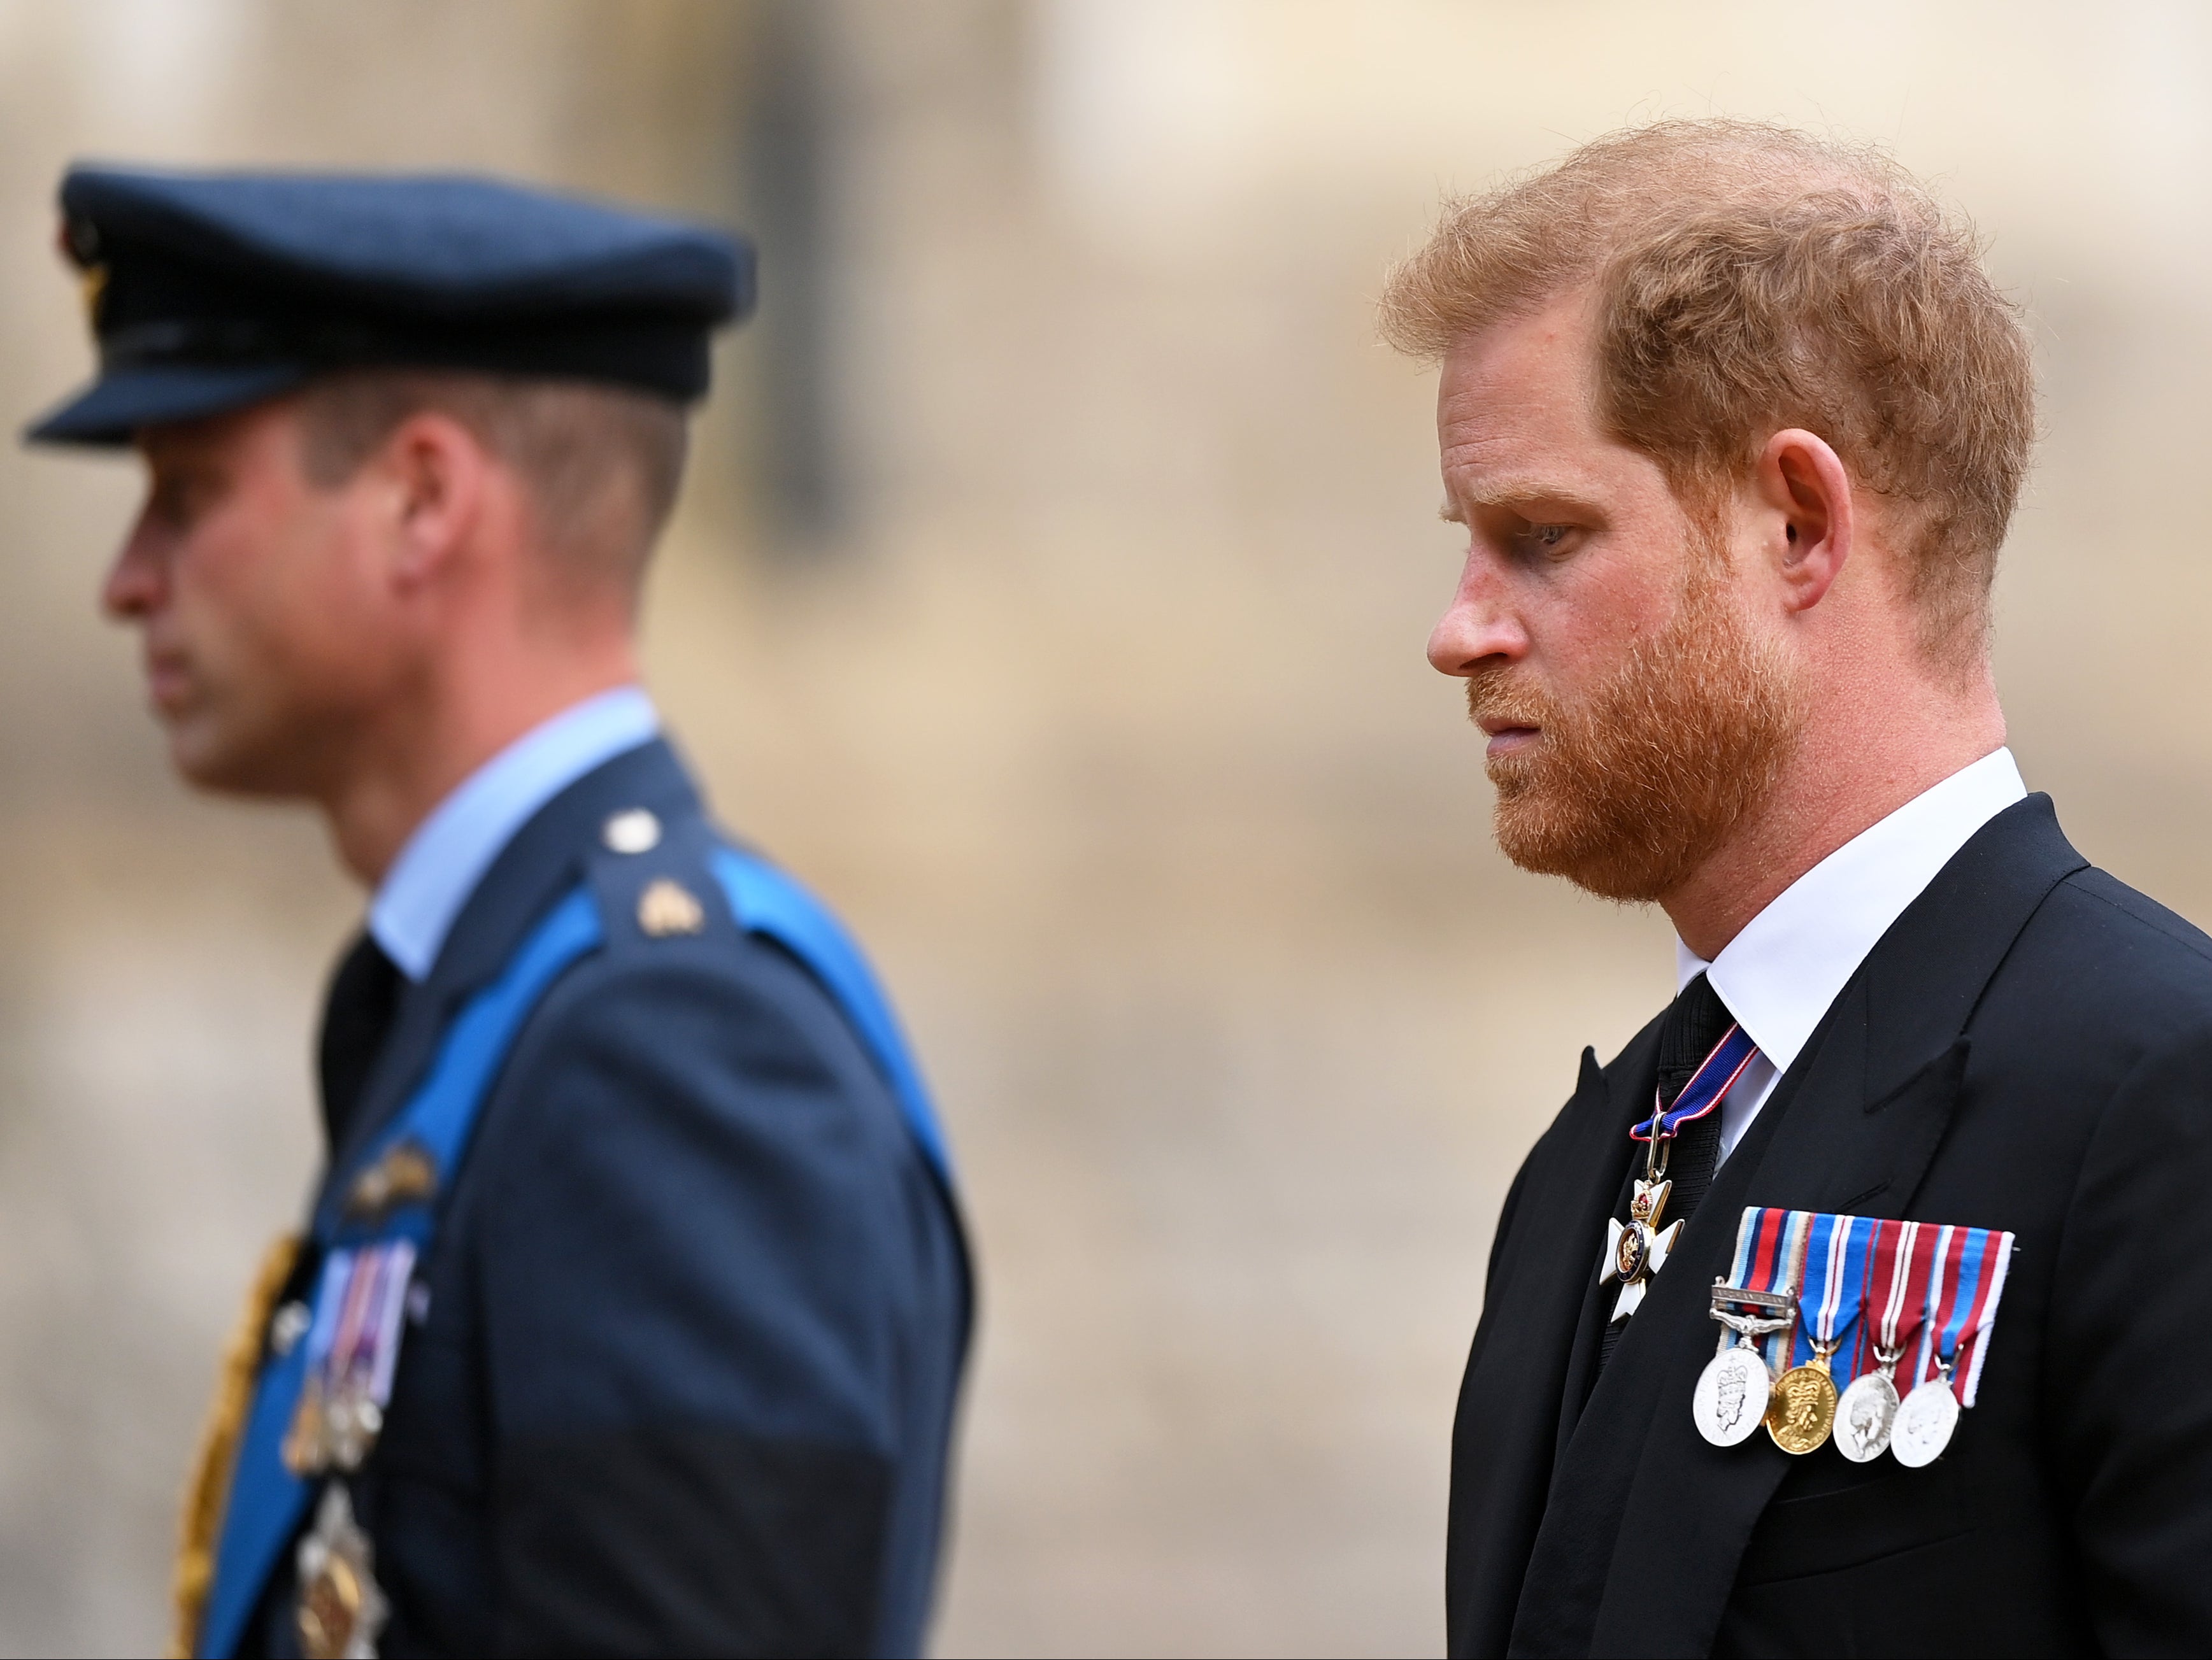 Prince Harry says he wants reconciliation but the claims in his book may make that difficult